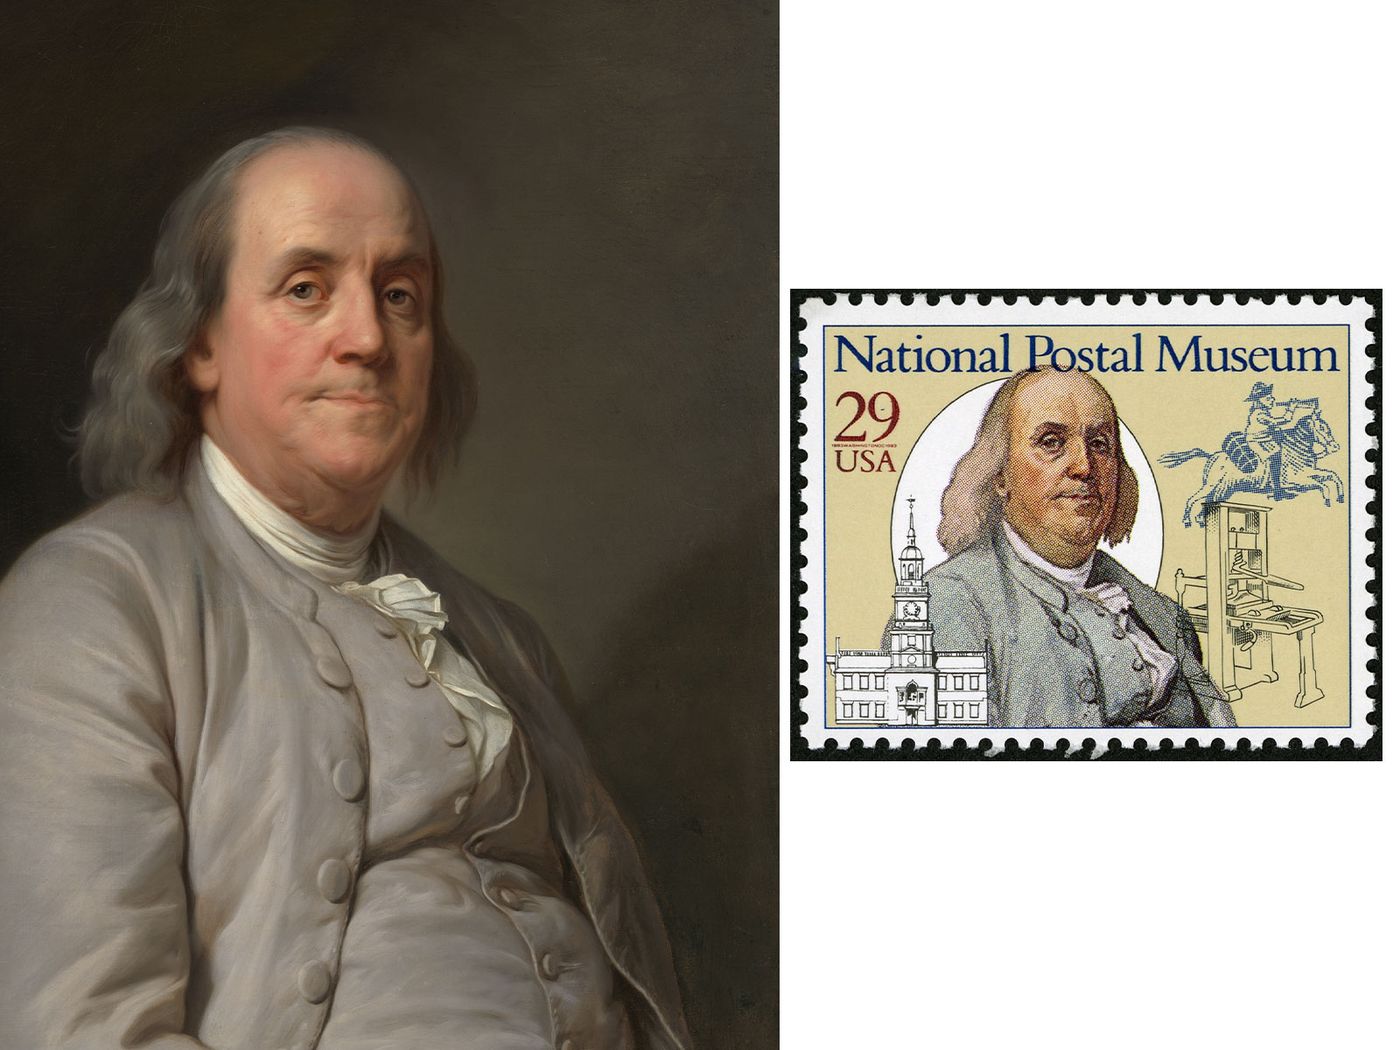 Ben Franklin in portrait and in a stamp